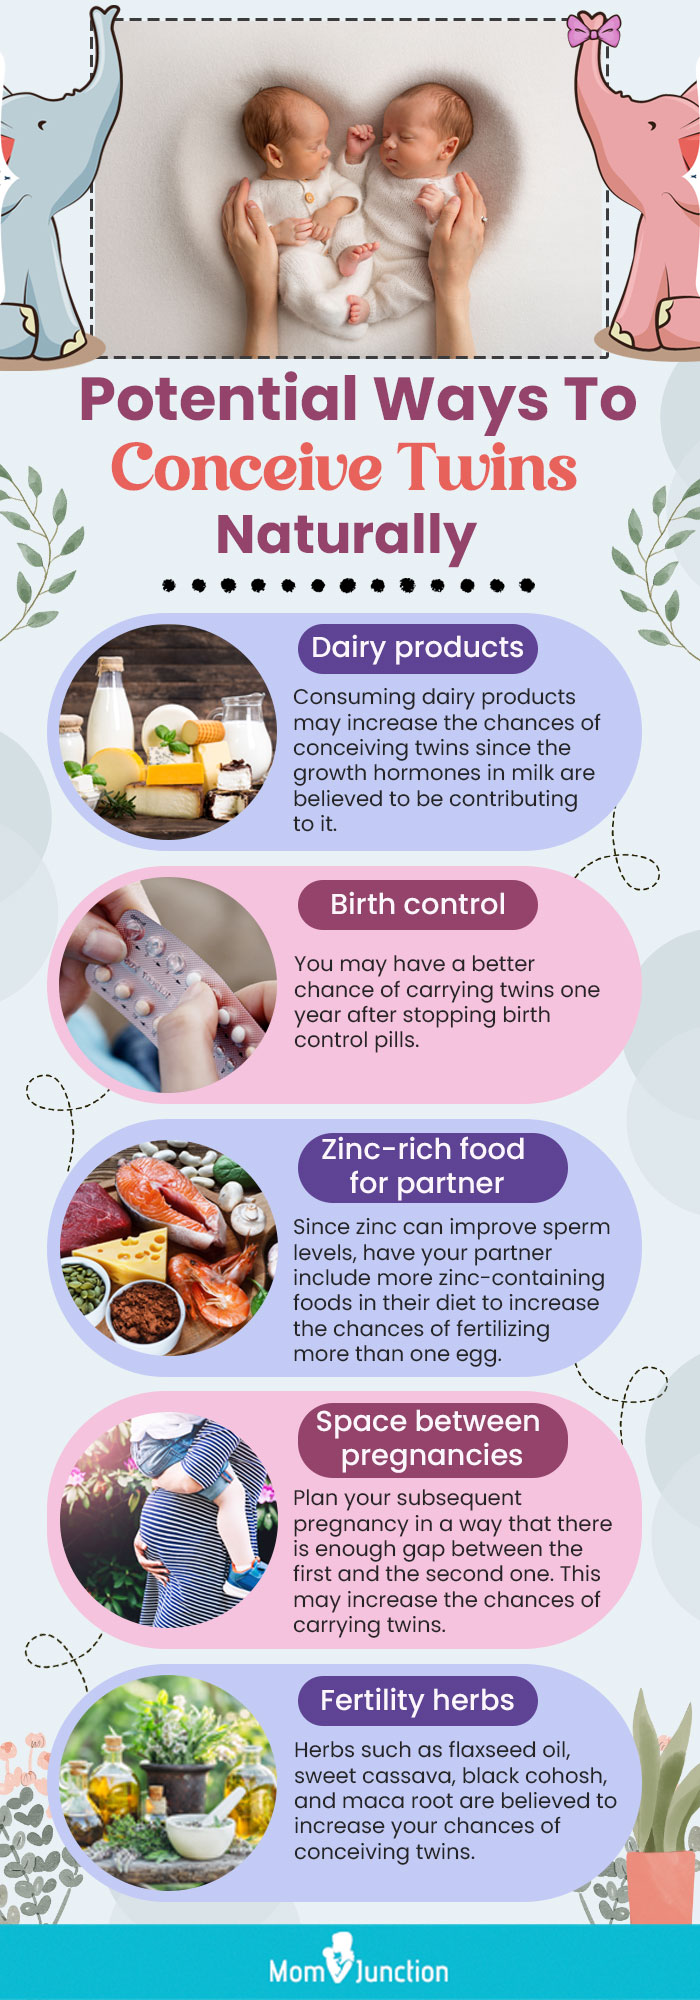 potential ways to conceive twins naturally (infographic)